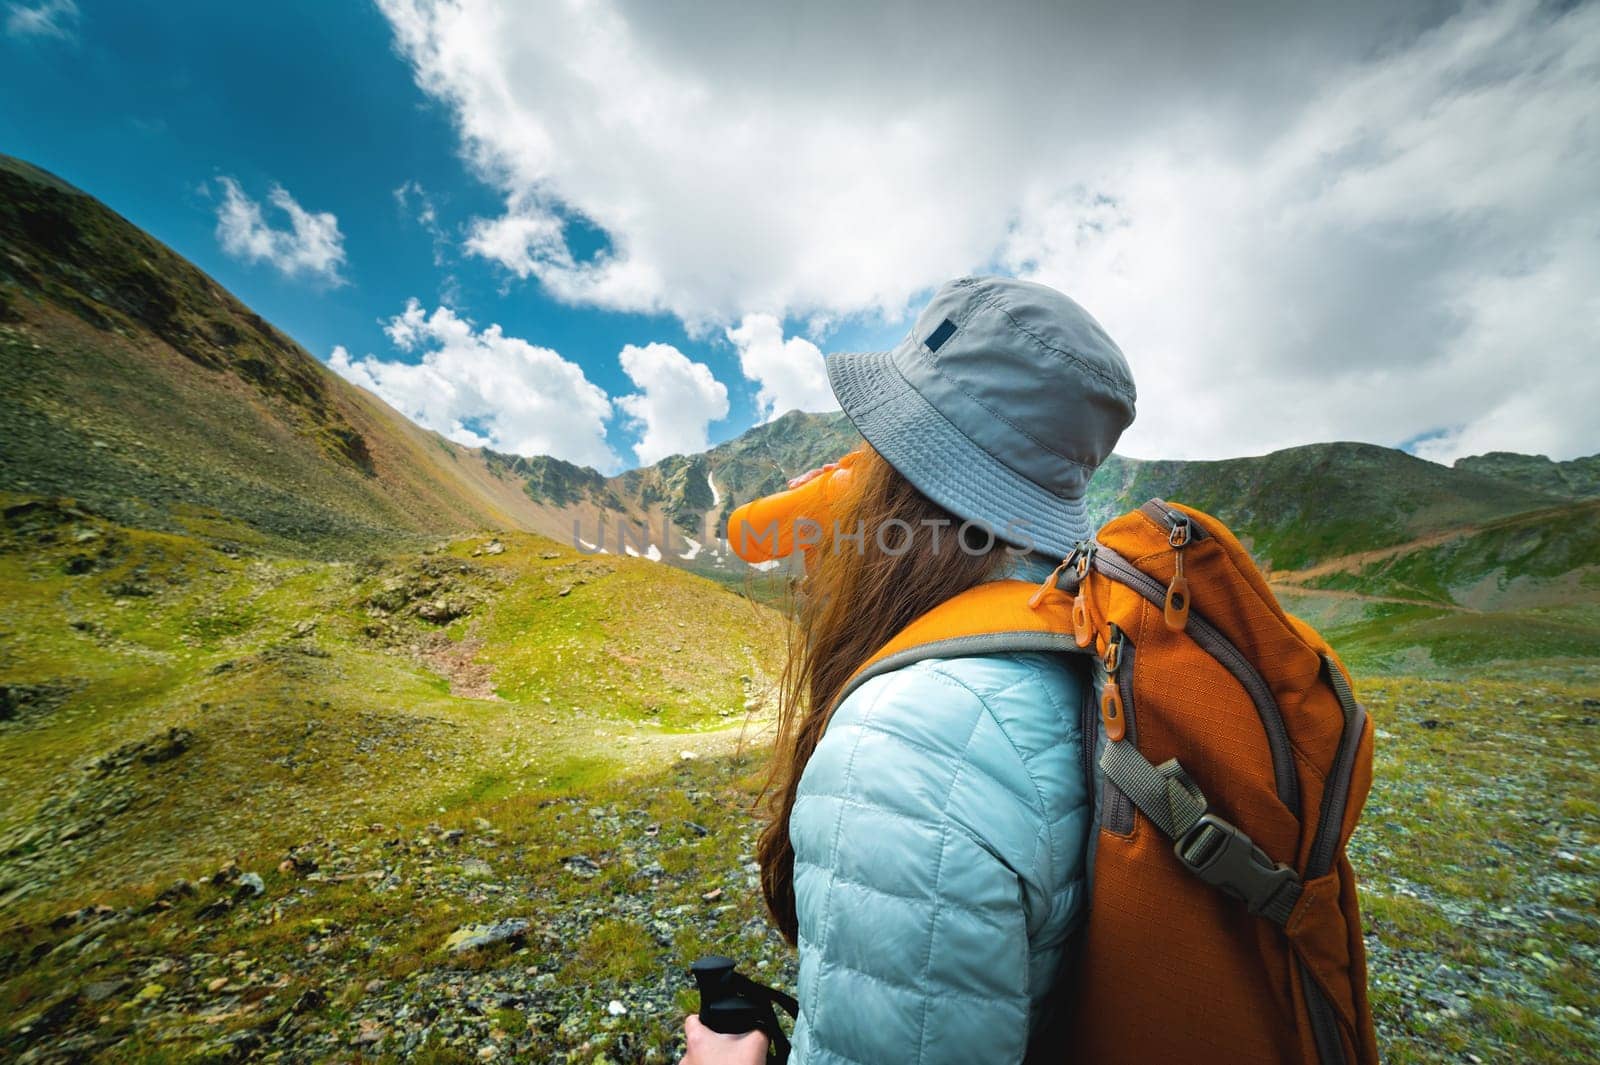 A successful tourist drinks water in a green meadow near high mountains. Travel and hiking concept with backpack, side view.